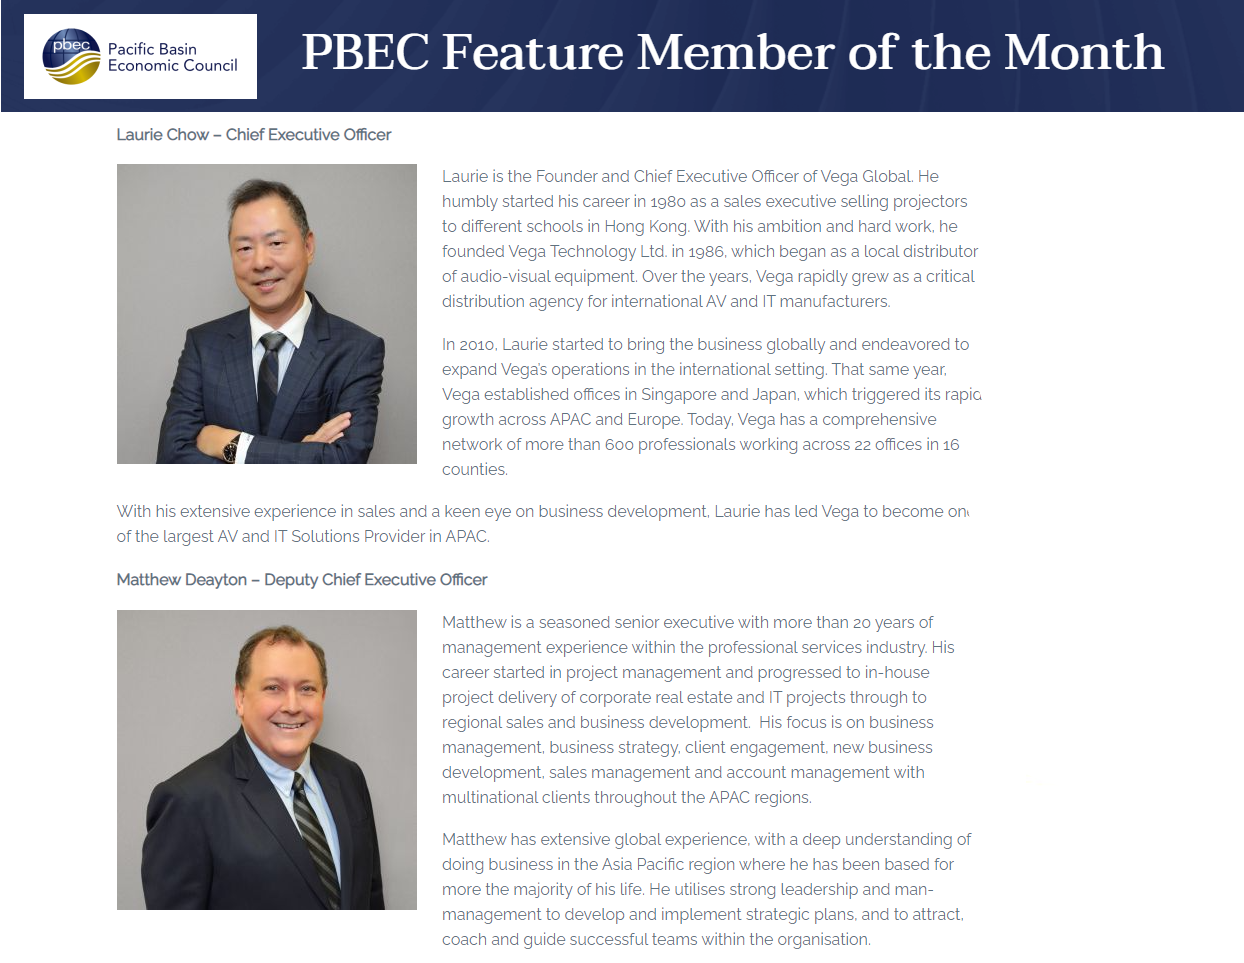 PBEC Featured Vega Global as a Member of the Month